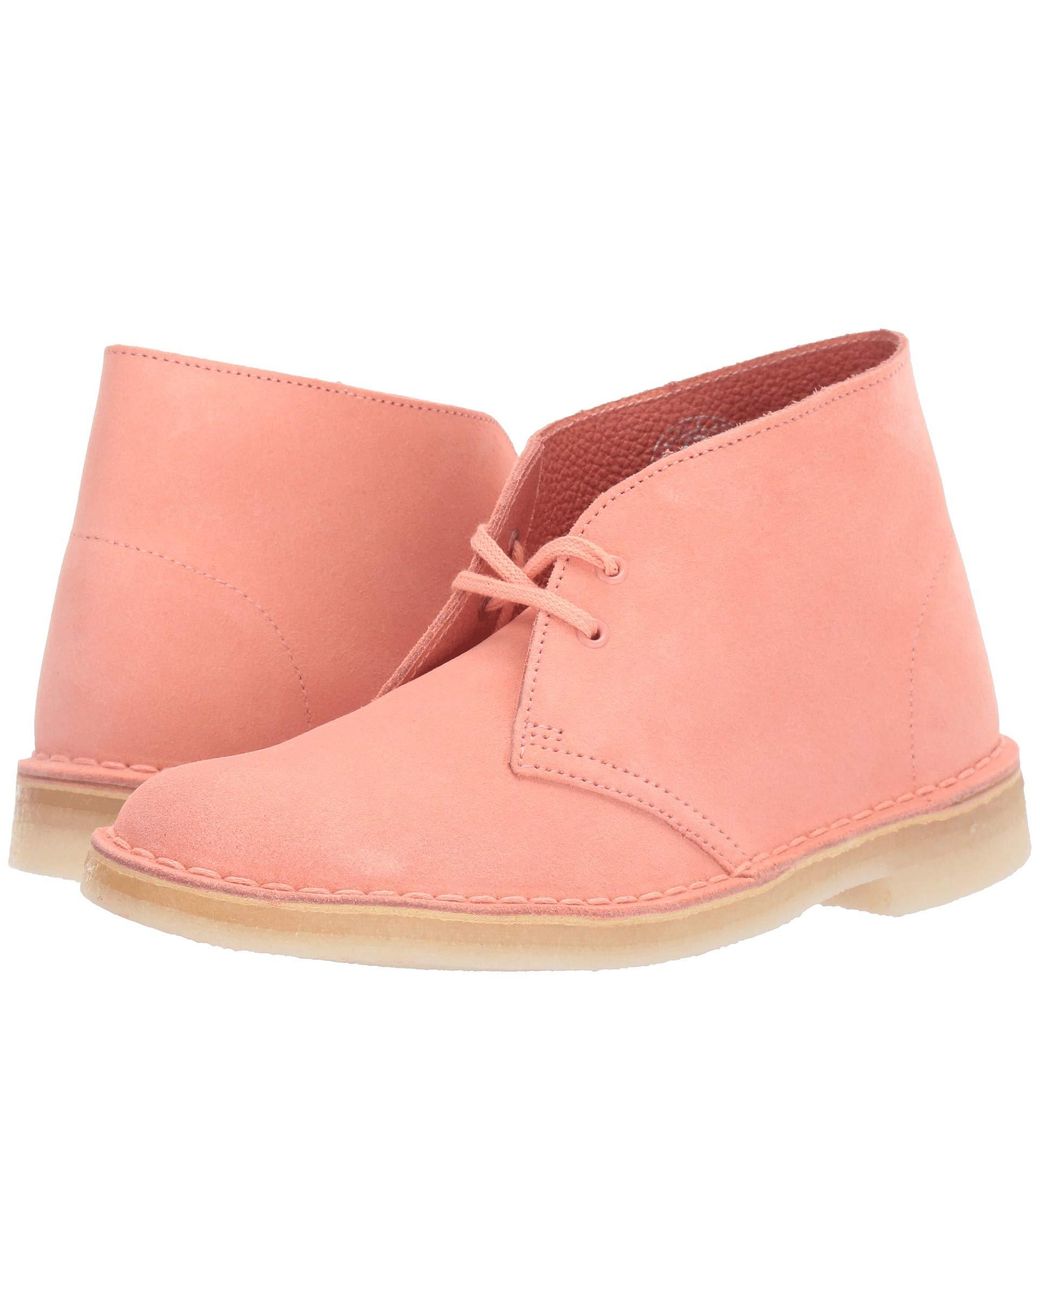 Clarks Desert Boot Ankle Bootie in Pink | Lyst